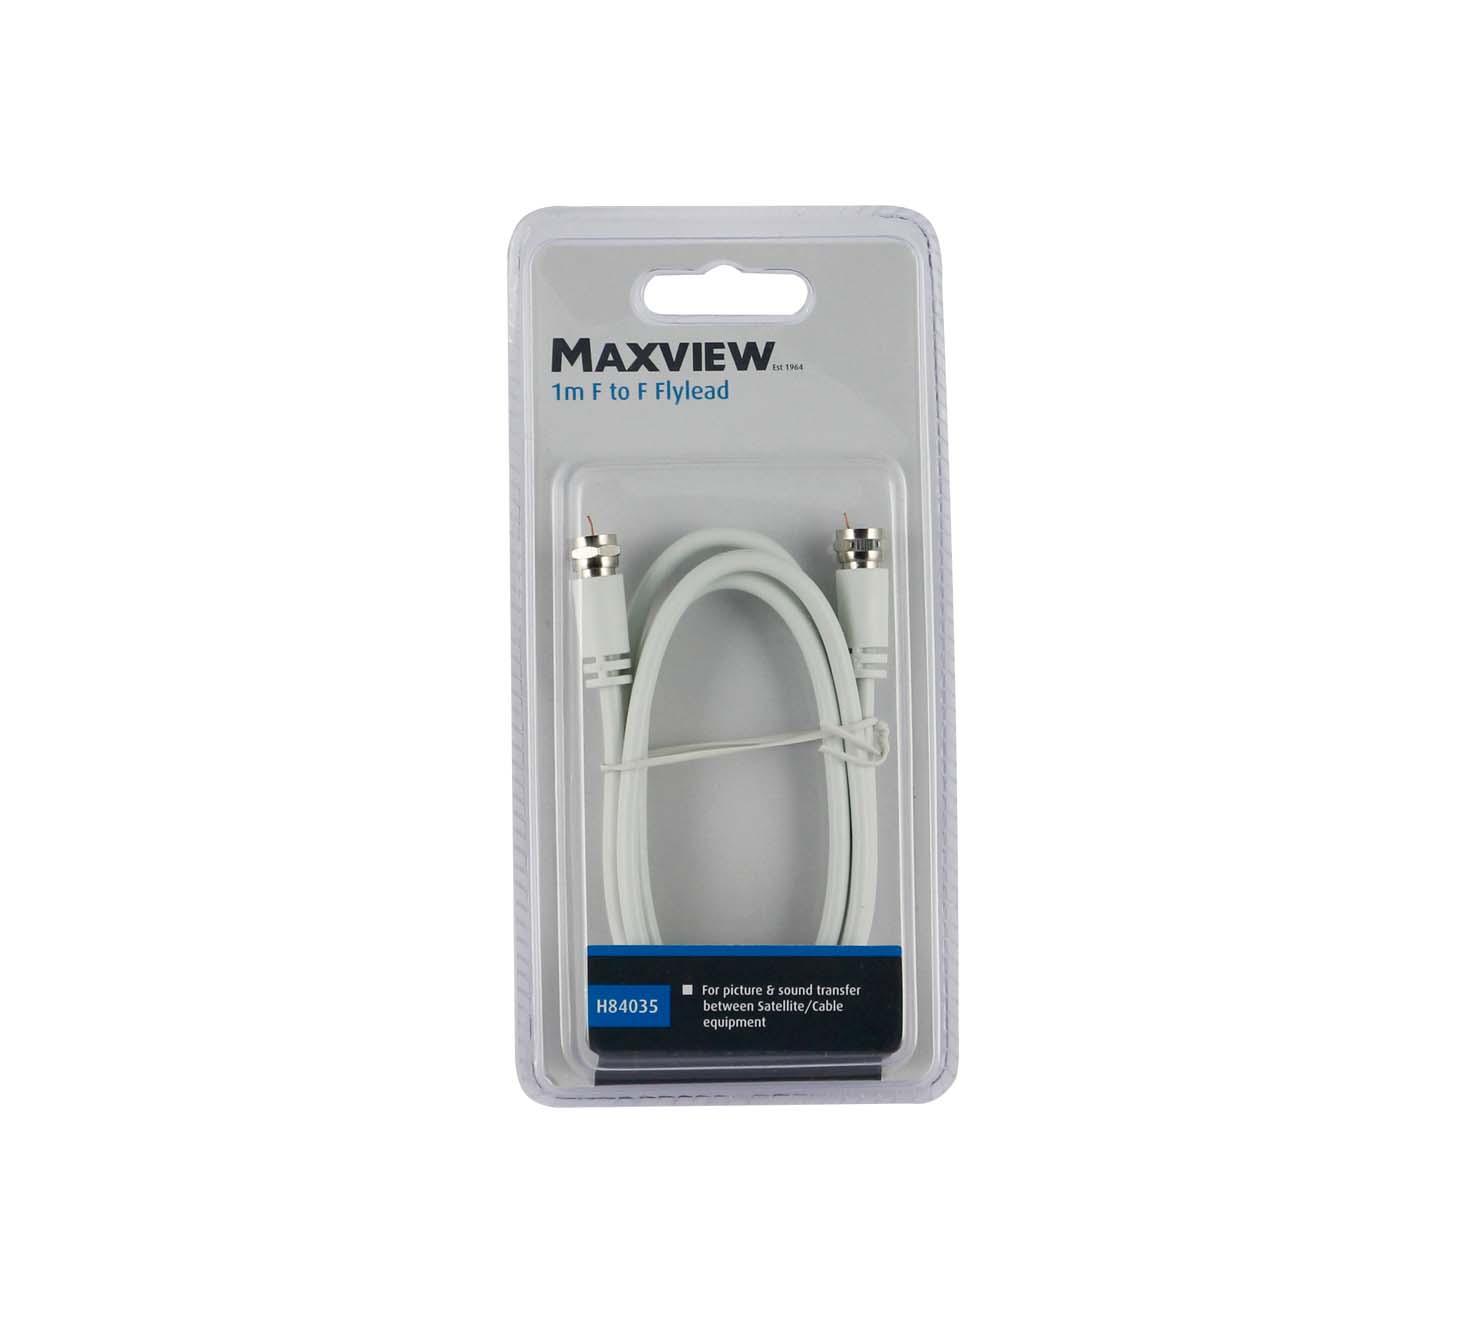 MAXVIEW H84039 F TO F FLYLEADS 2M